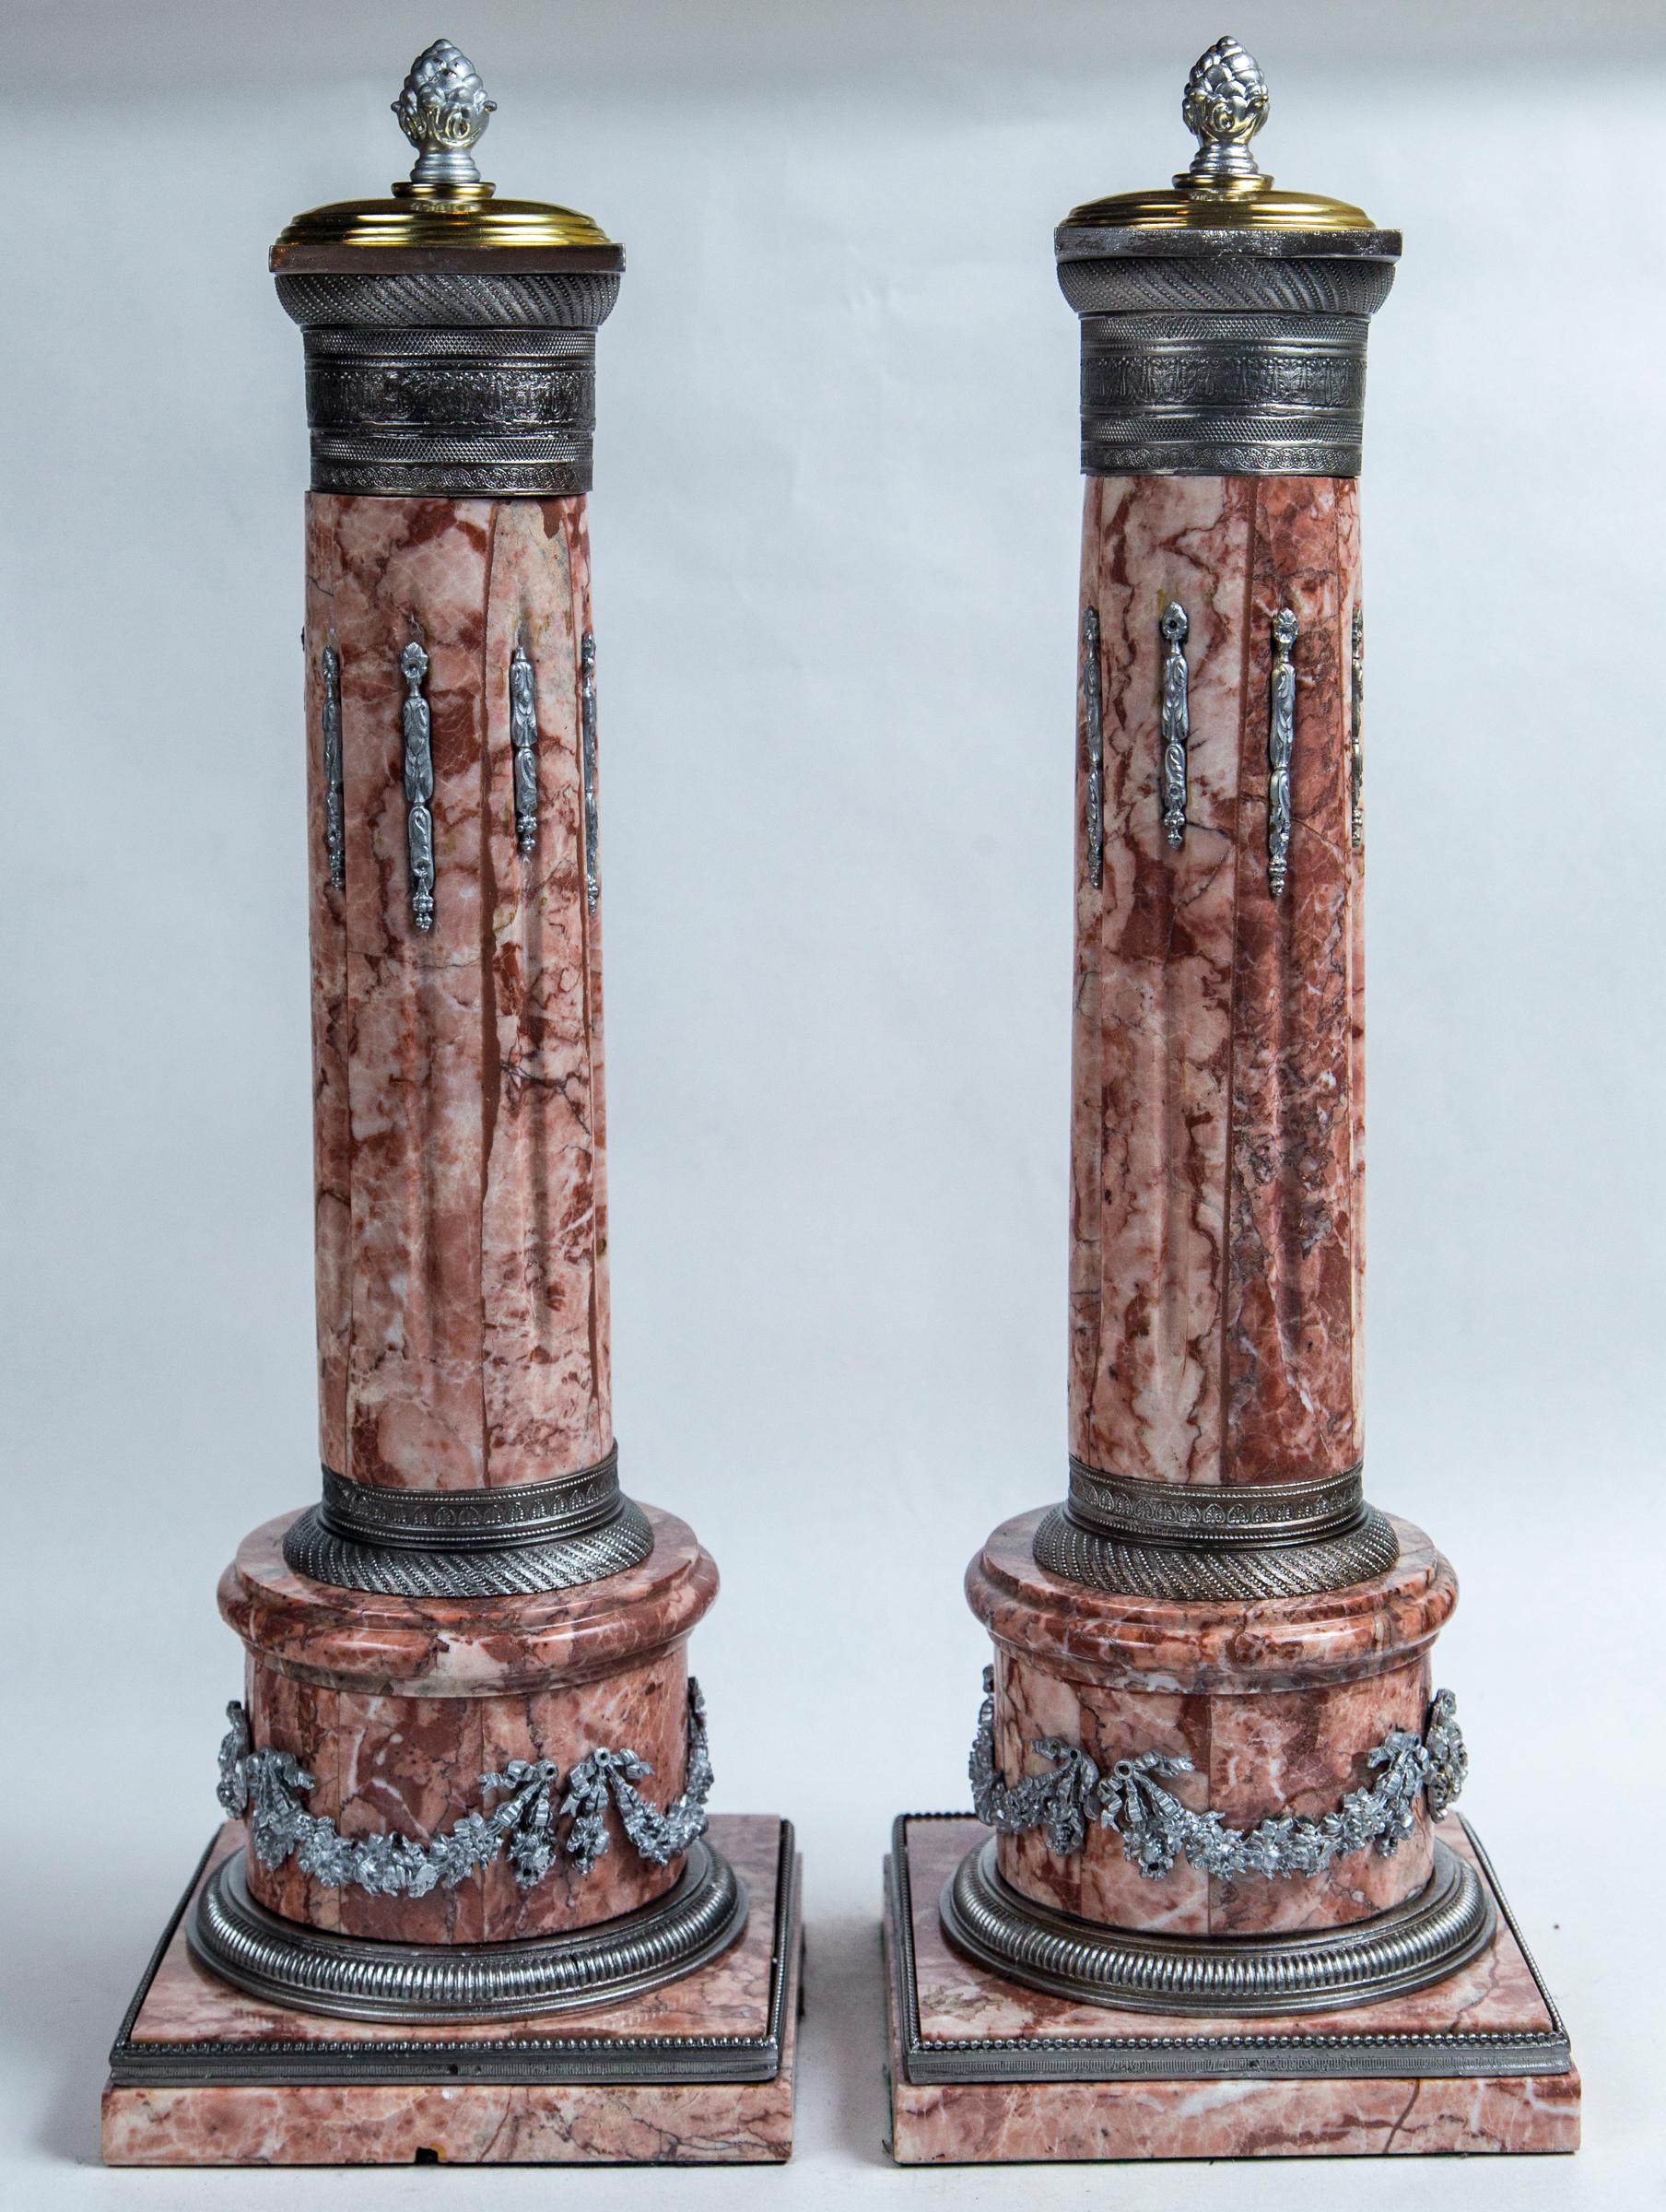 Each column sits atop a square base trimmed in silvered metal. The round column base trimmed with similar decoration and swags. The columns themselves with silvered metal ring and mounts within fluting. The capital and finial also of the same